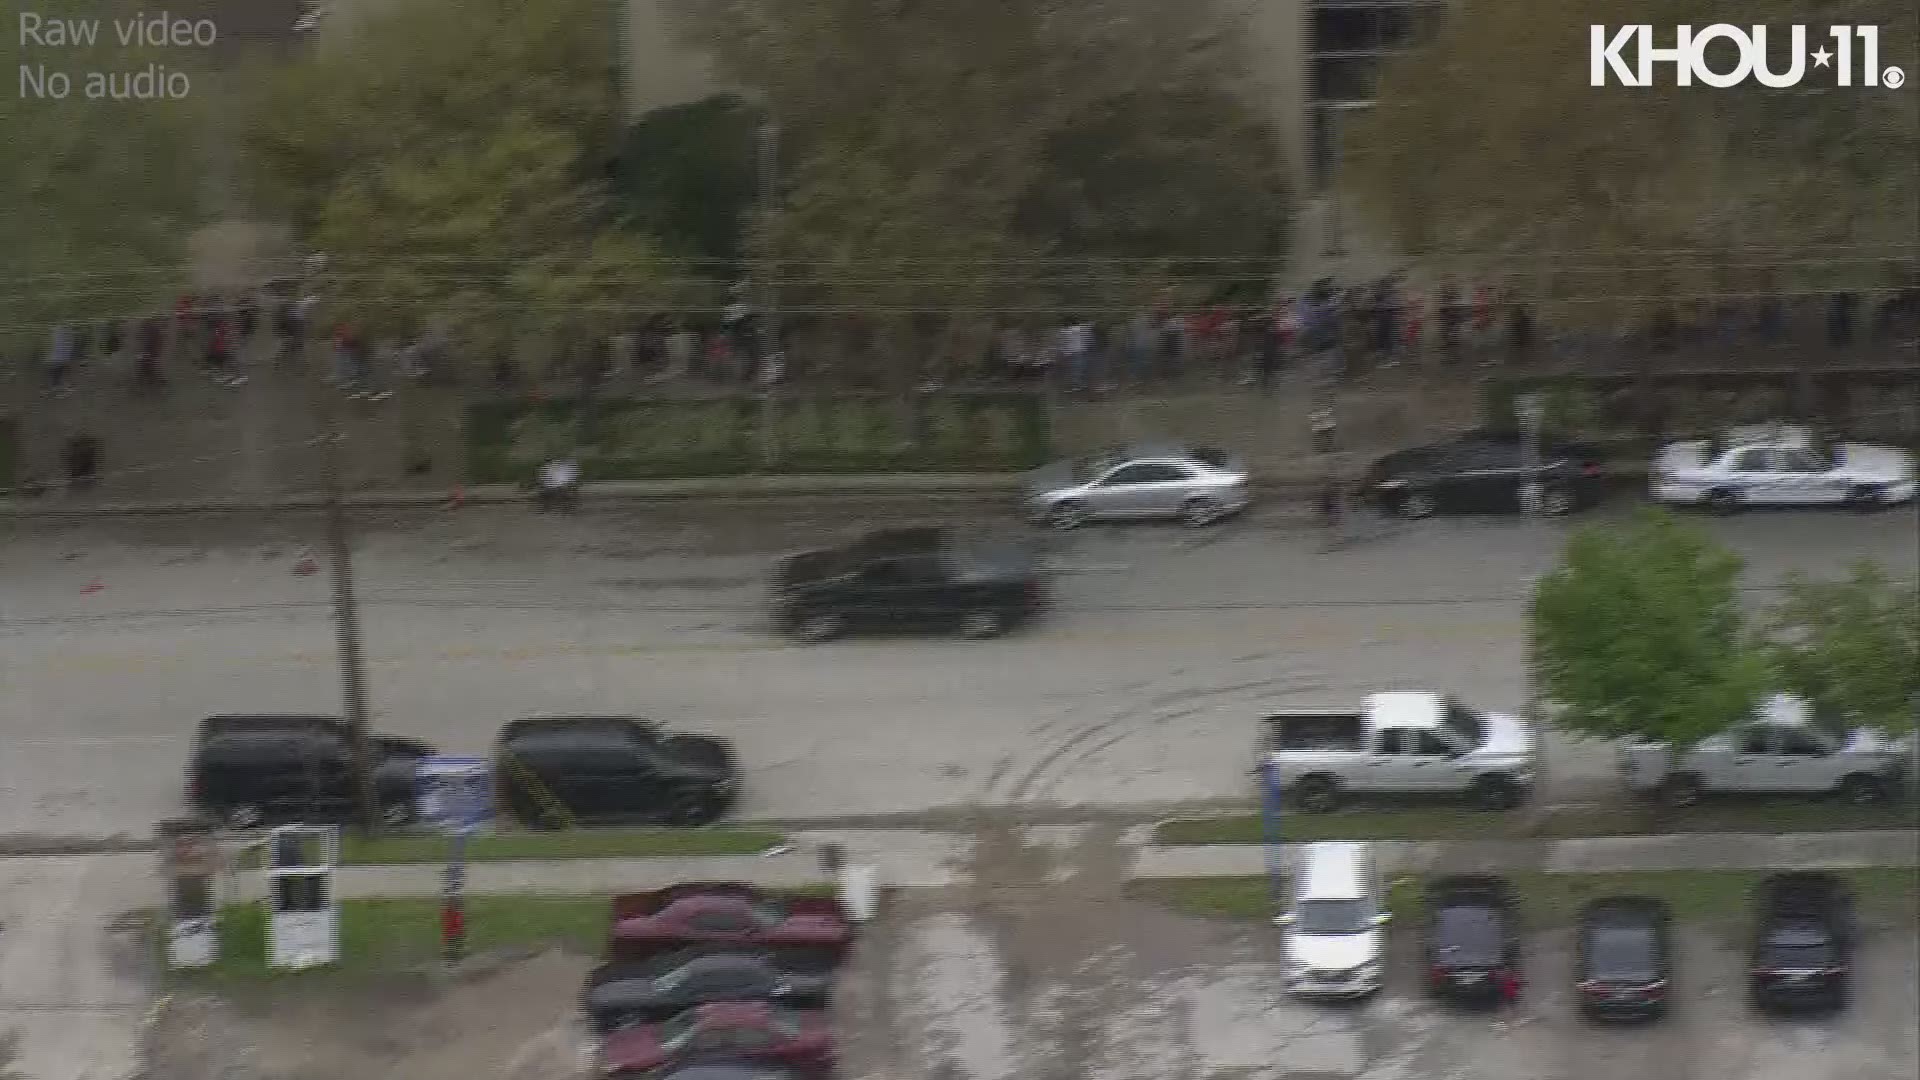 Fans lined up early to get the Travis Scott bobblehead giveaway at Toyota Center on Feb. 24, 2020.